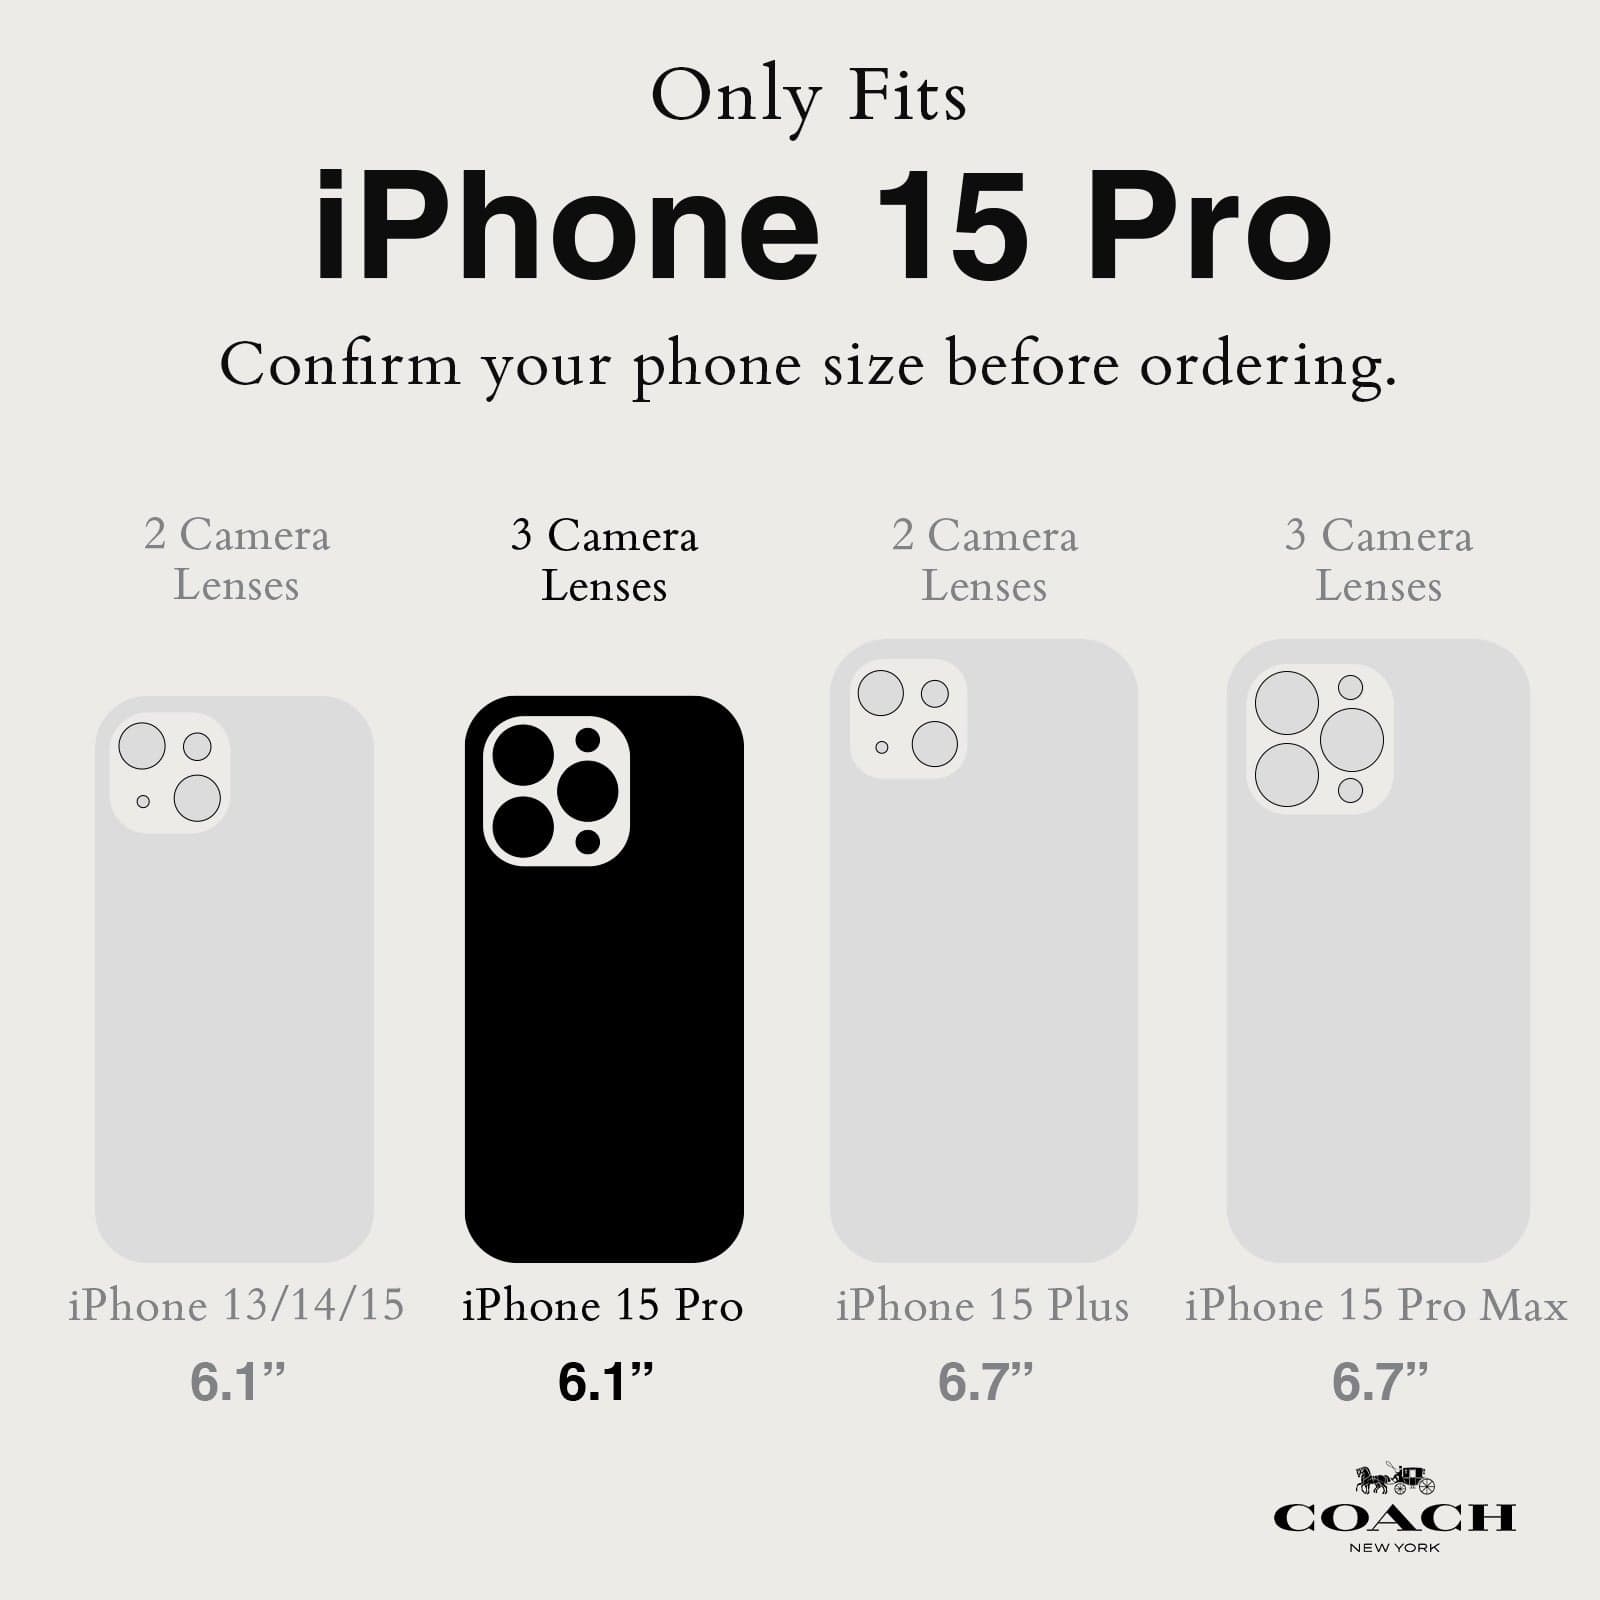 ONLY FITS IPHONE 15 PRO. CONFIRM YOUR PHONE SIZE BEFORE ORDERING.